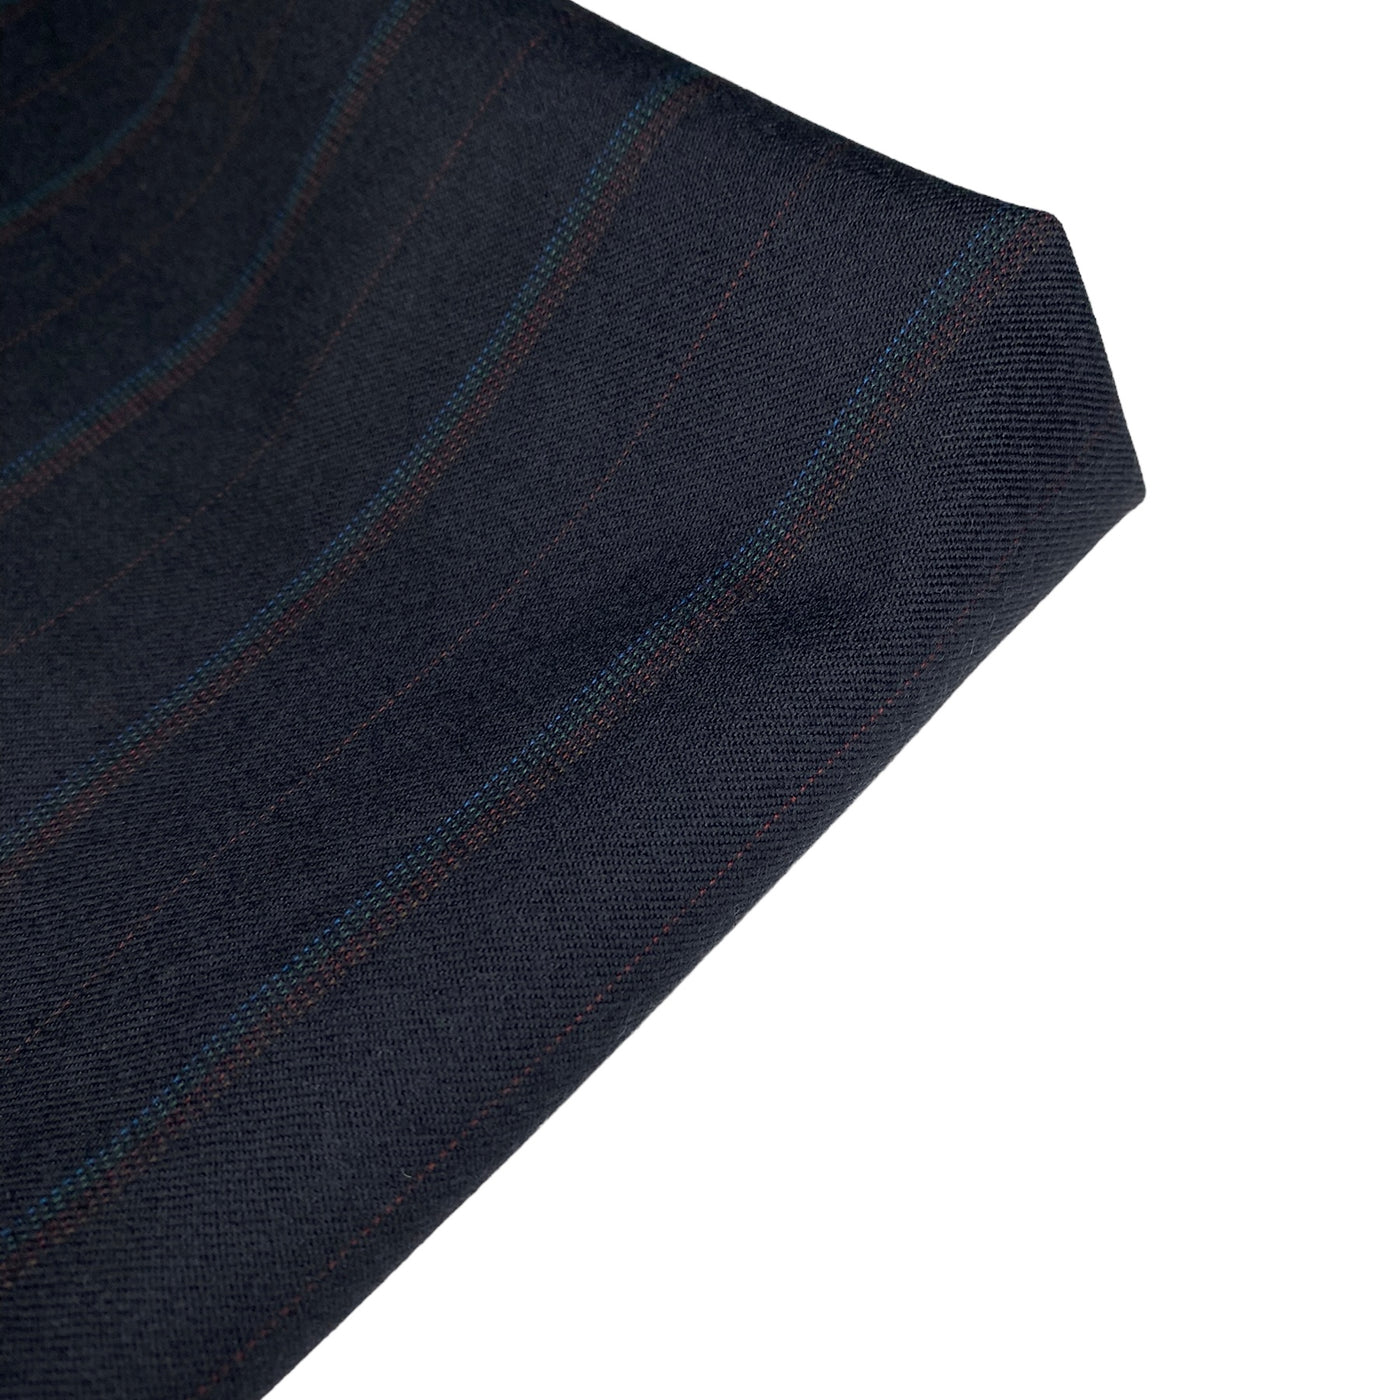 Wool Striped Suiting - Navy/Blue/Green/Red